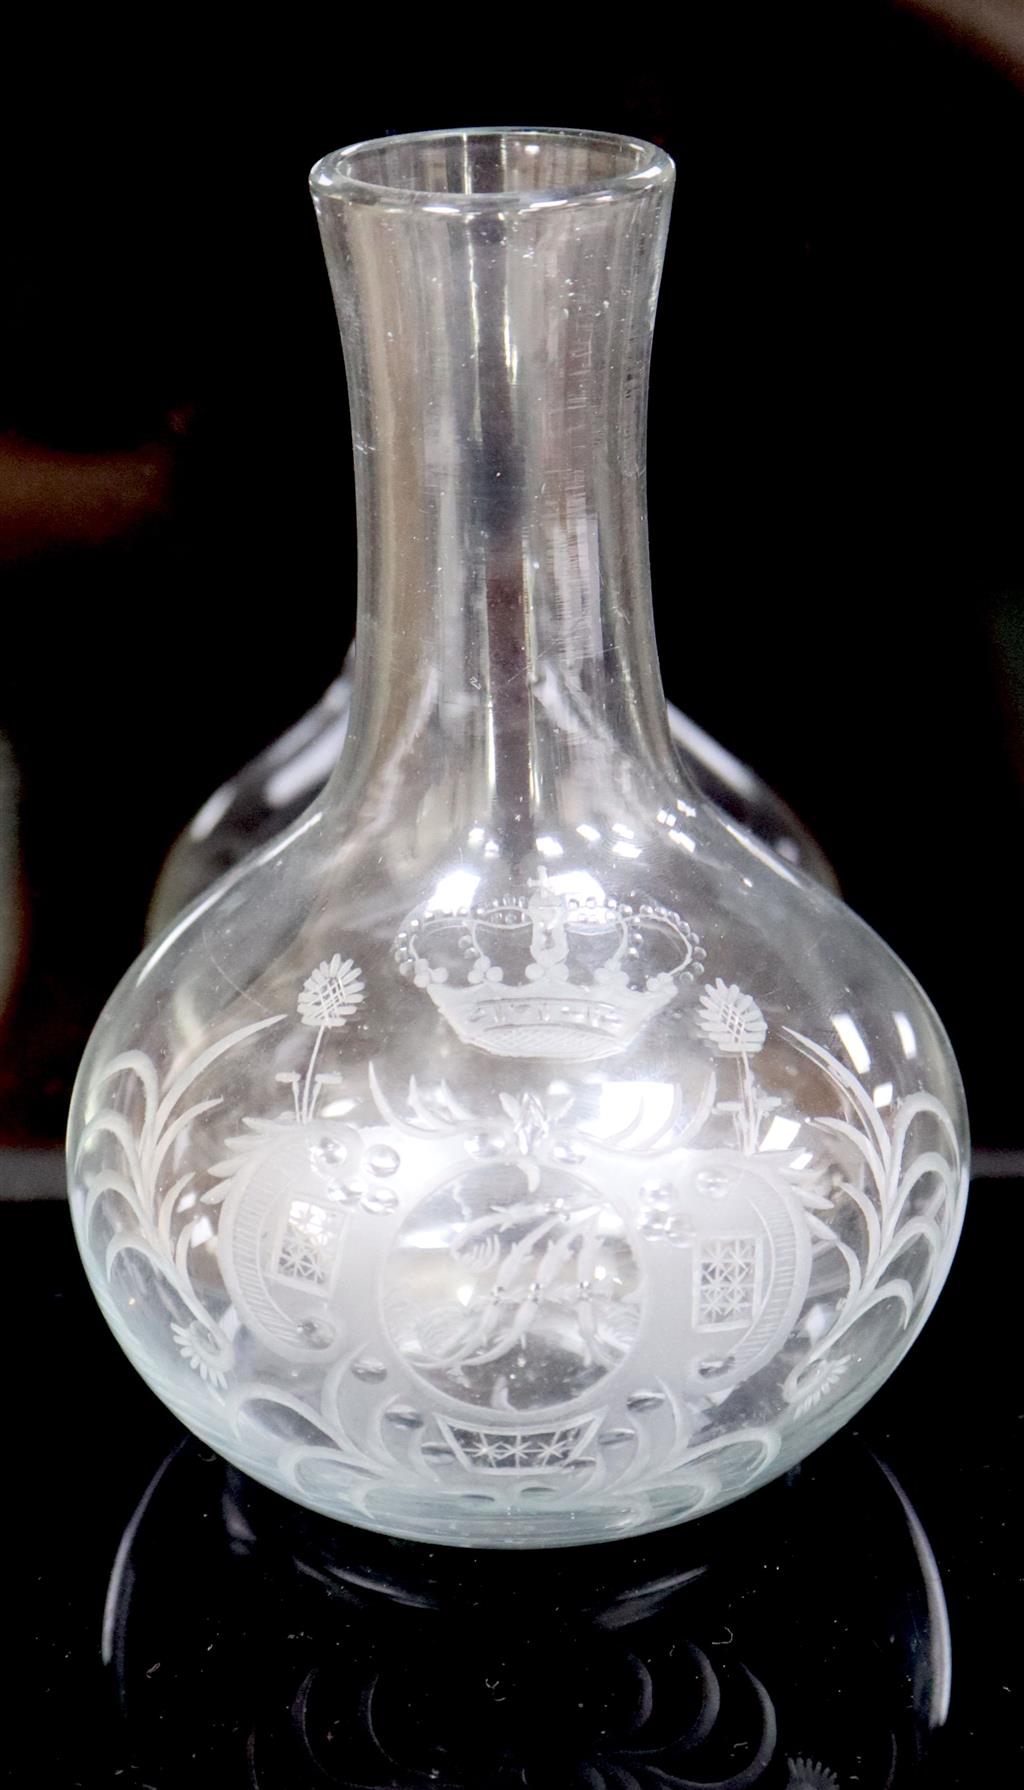 A German glass bottle vase, first quarter 19th century, commemorating Frederick Augustus, Elector of Saxony, 13.5cm high